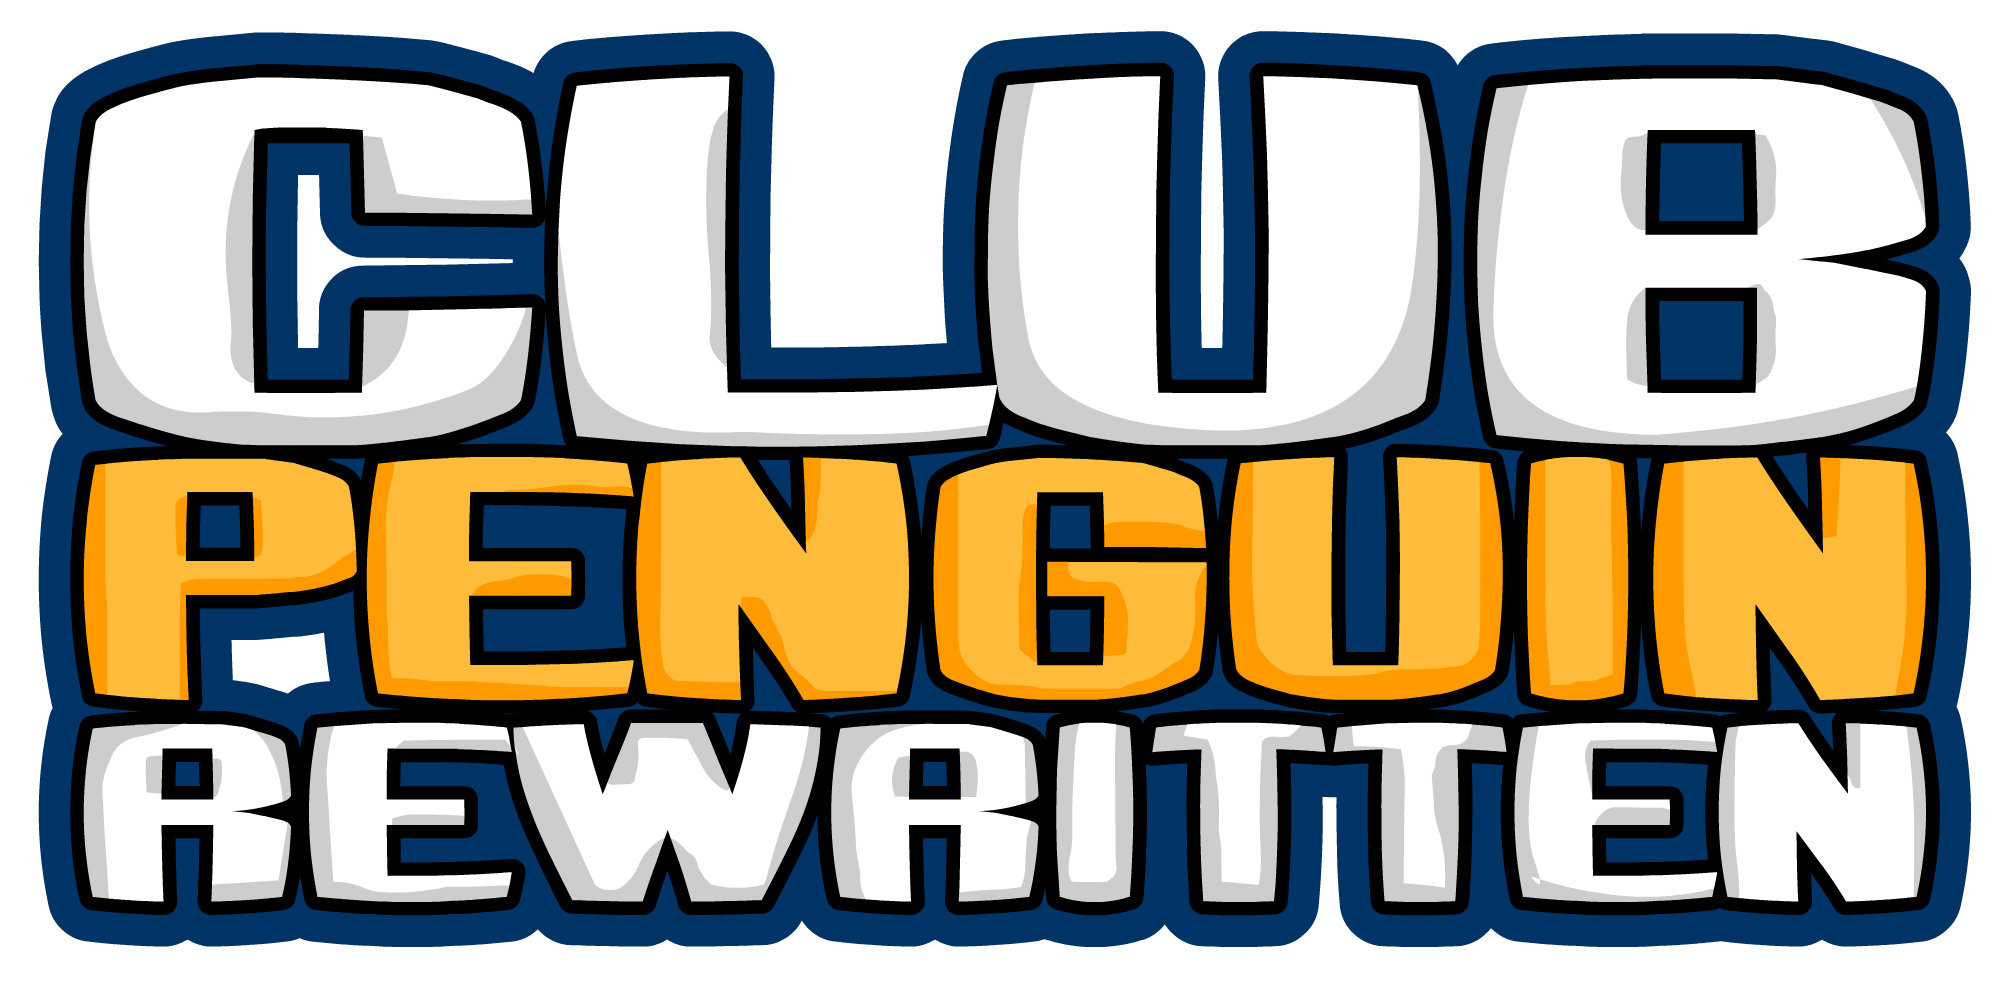 Club penguin activation code for free membership 2017